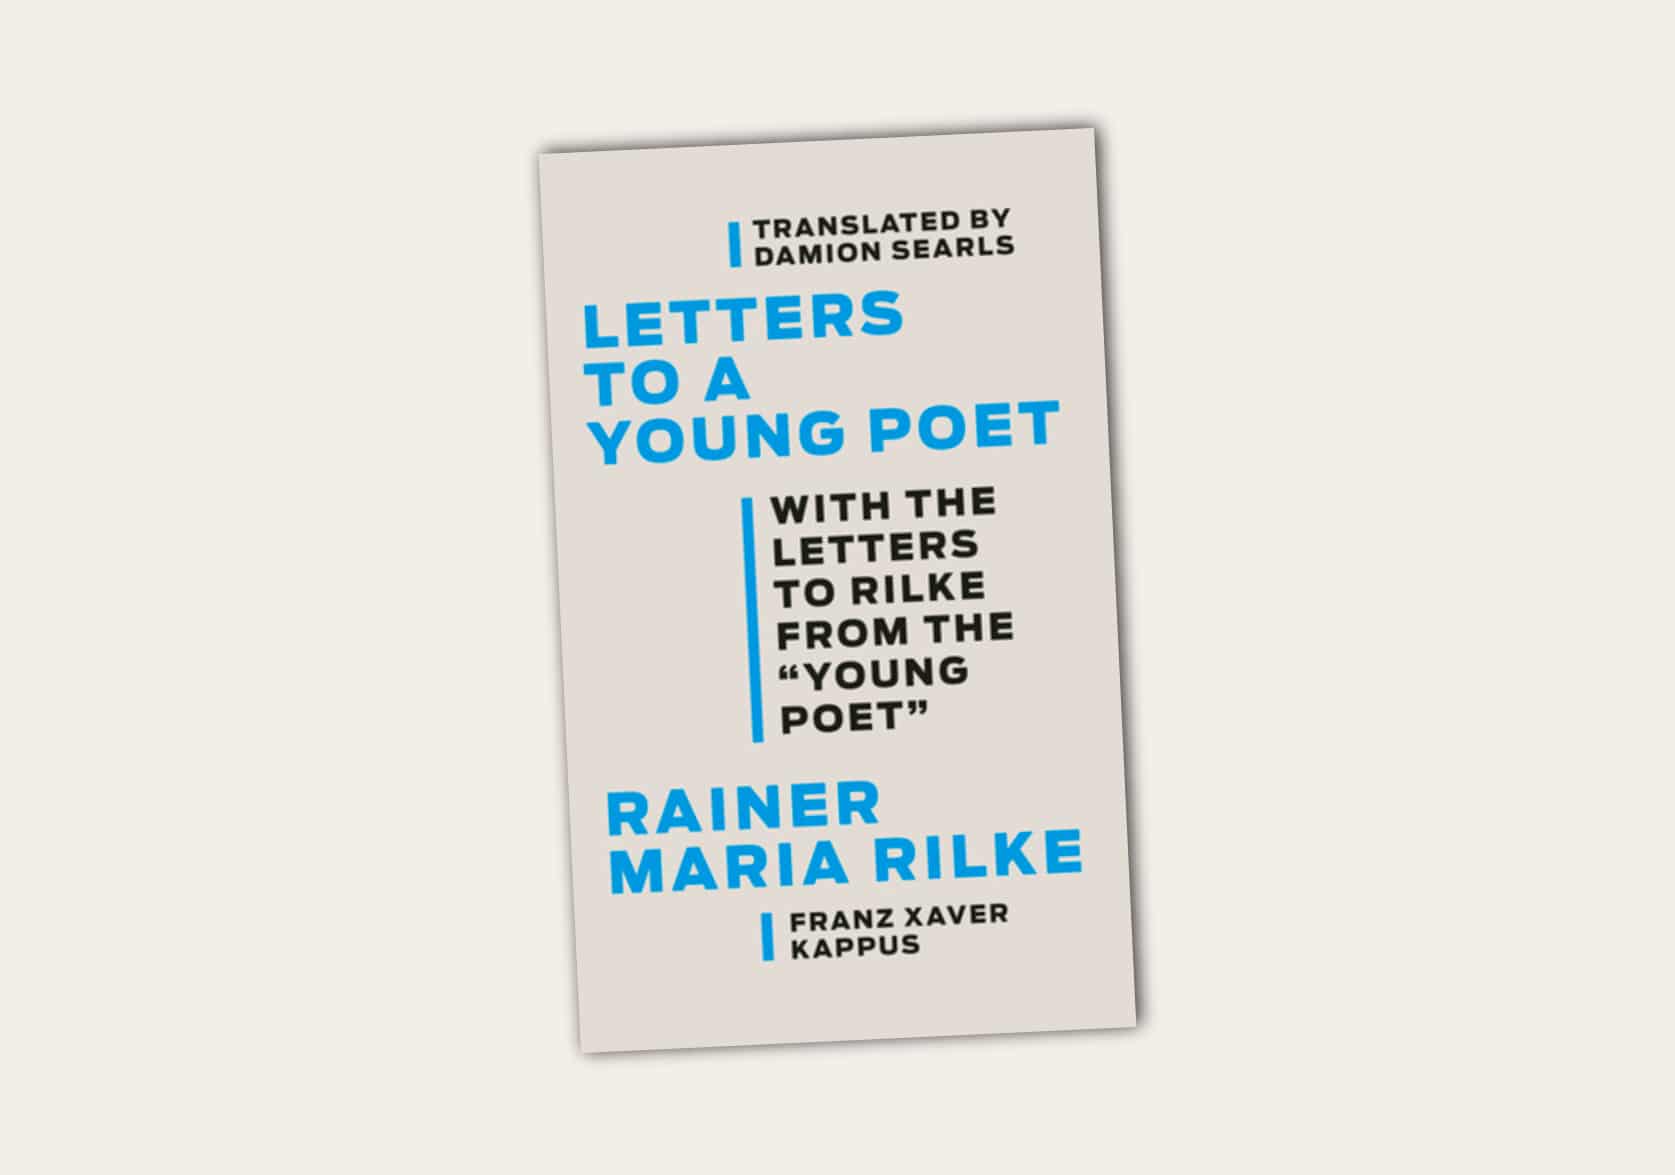 Letters to a Young Poet by Rainer Maria Rilke, With the Letters to Rilke from the "Young Poet", Franz Xaver Kappus, Translated by Damion Searls.